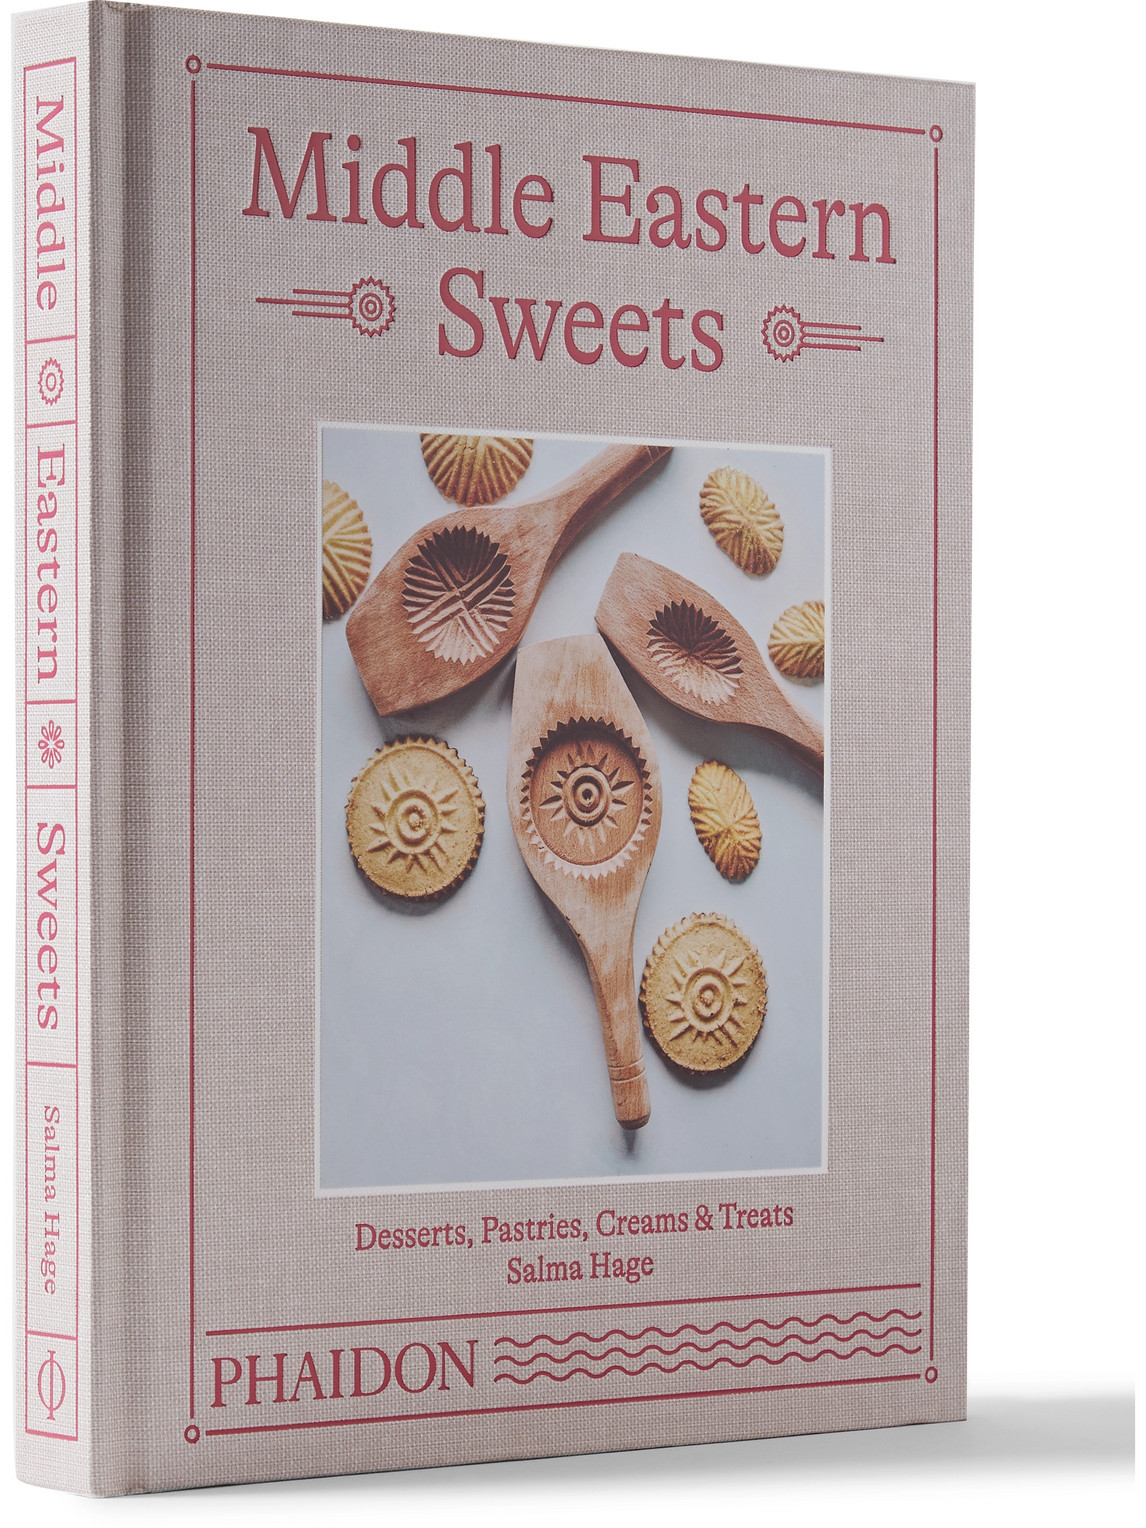 Phaidon Middle Eastern Sweets: Desserts, Pastries, Creams & Treats Hardcover Book In Pink